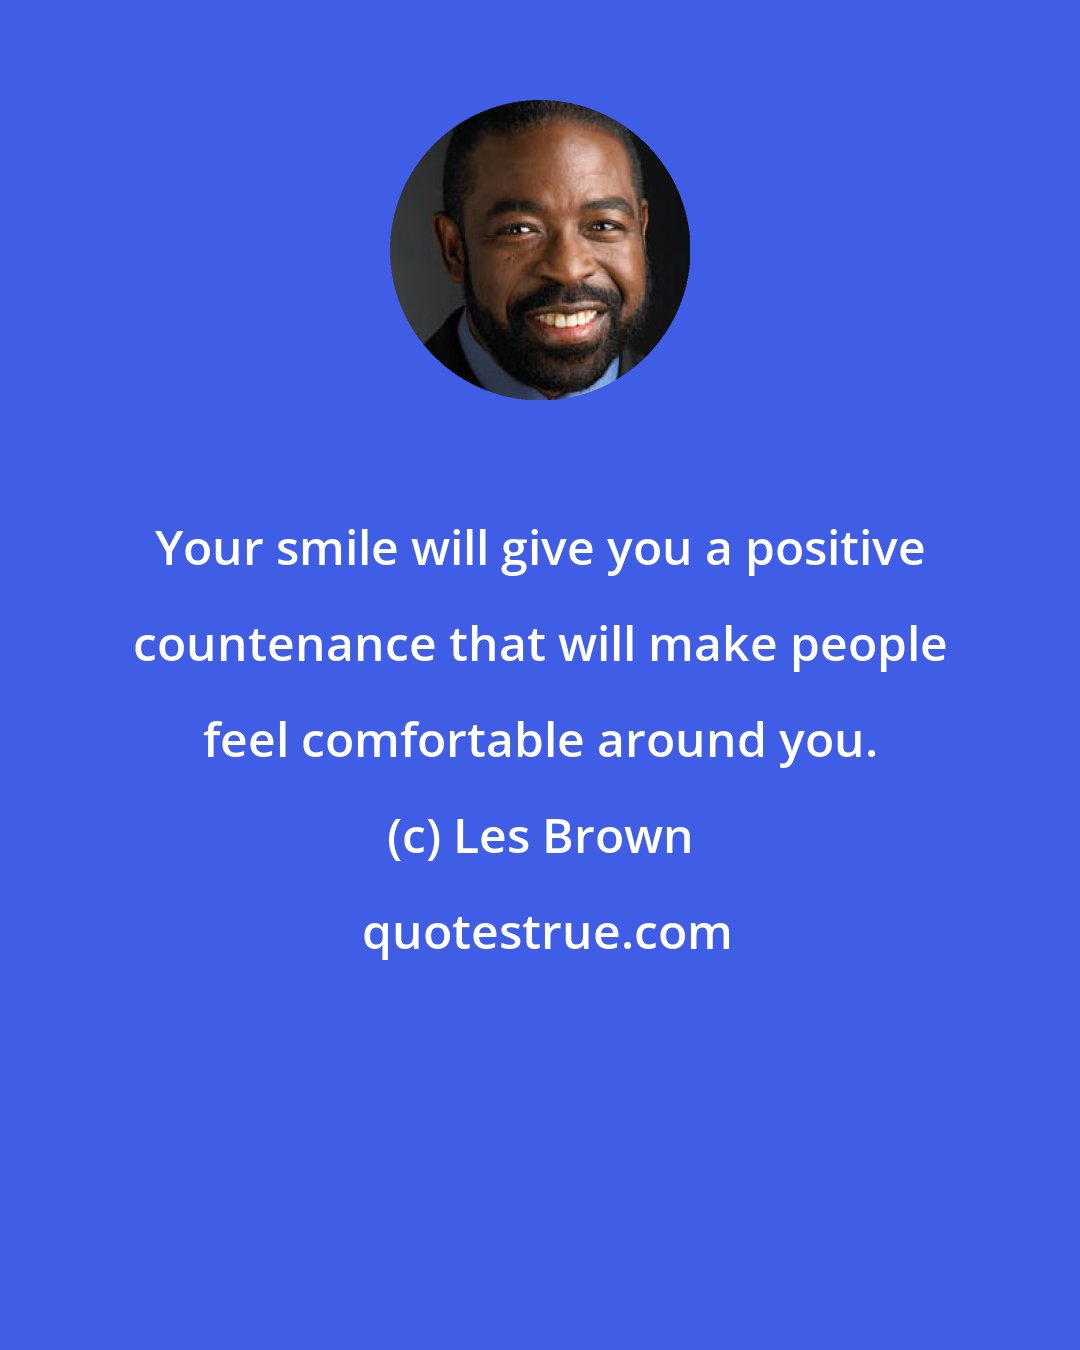 Les Brown: Your smile will give you a positive countenance that will make people feel comfortable around you.